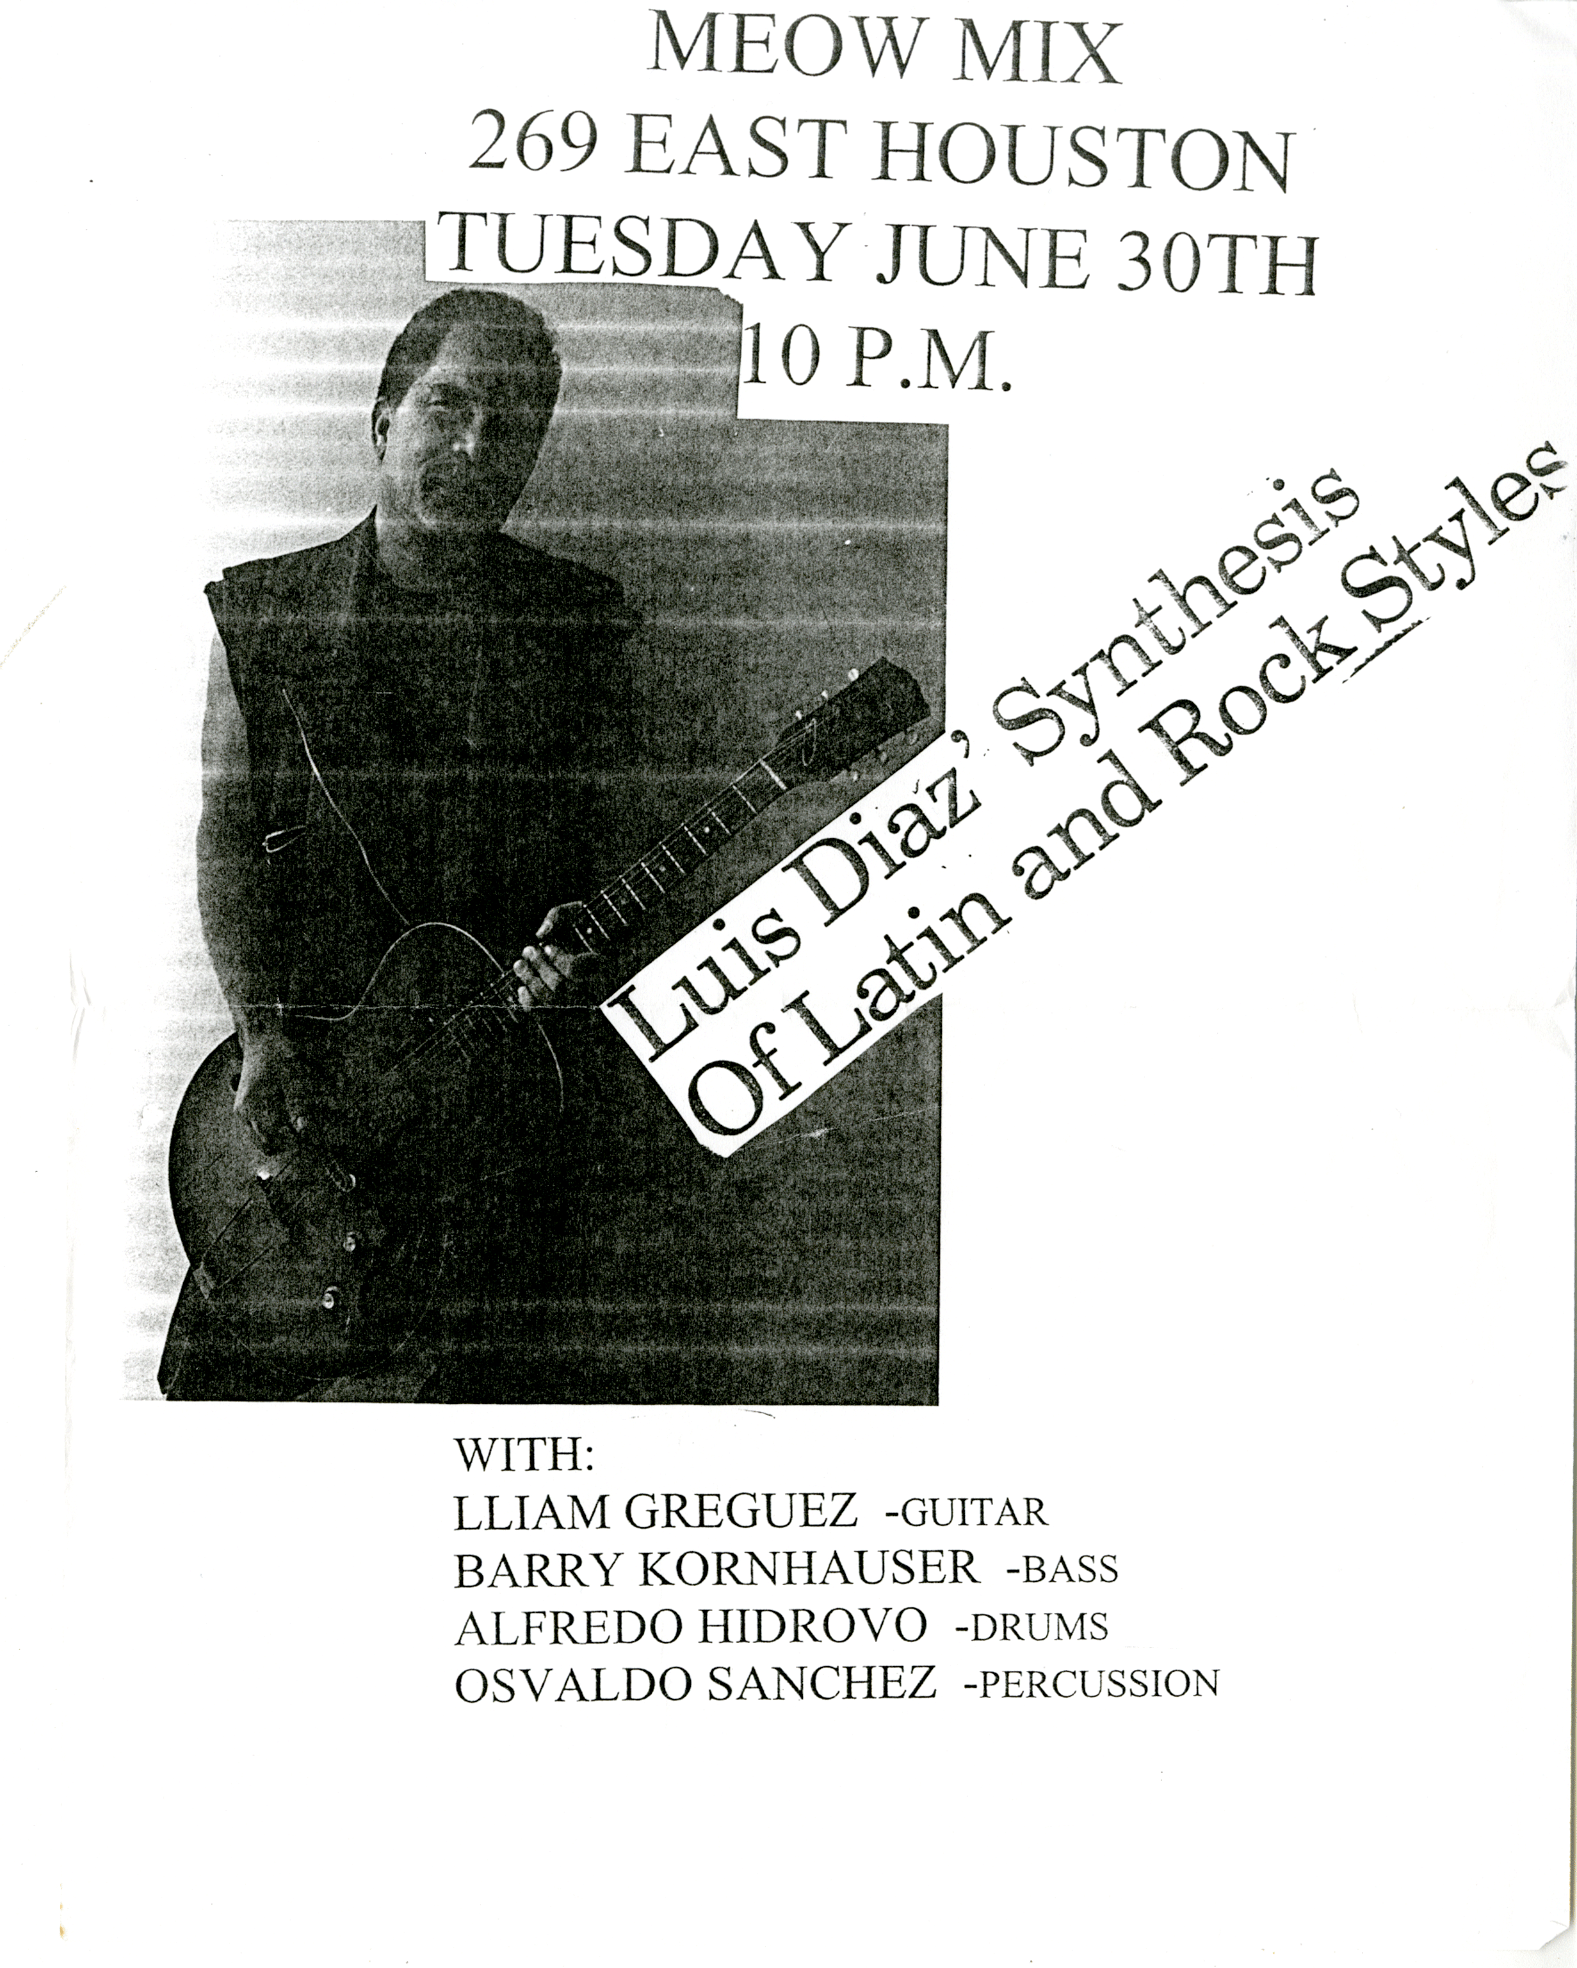 Luis Dias's Synthesis of Latin and Rock Styles at the Meow Mix, Concert Flyer, June 30, ca. 1990s